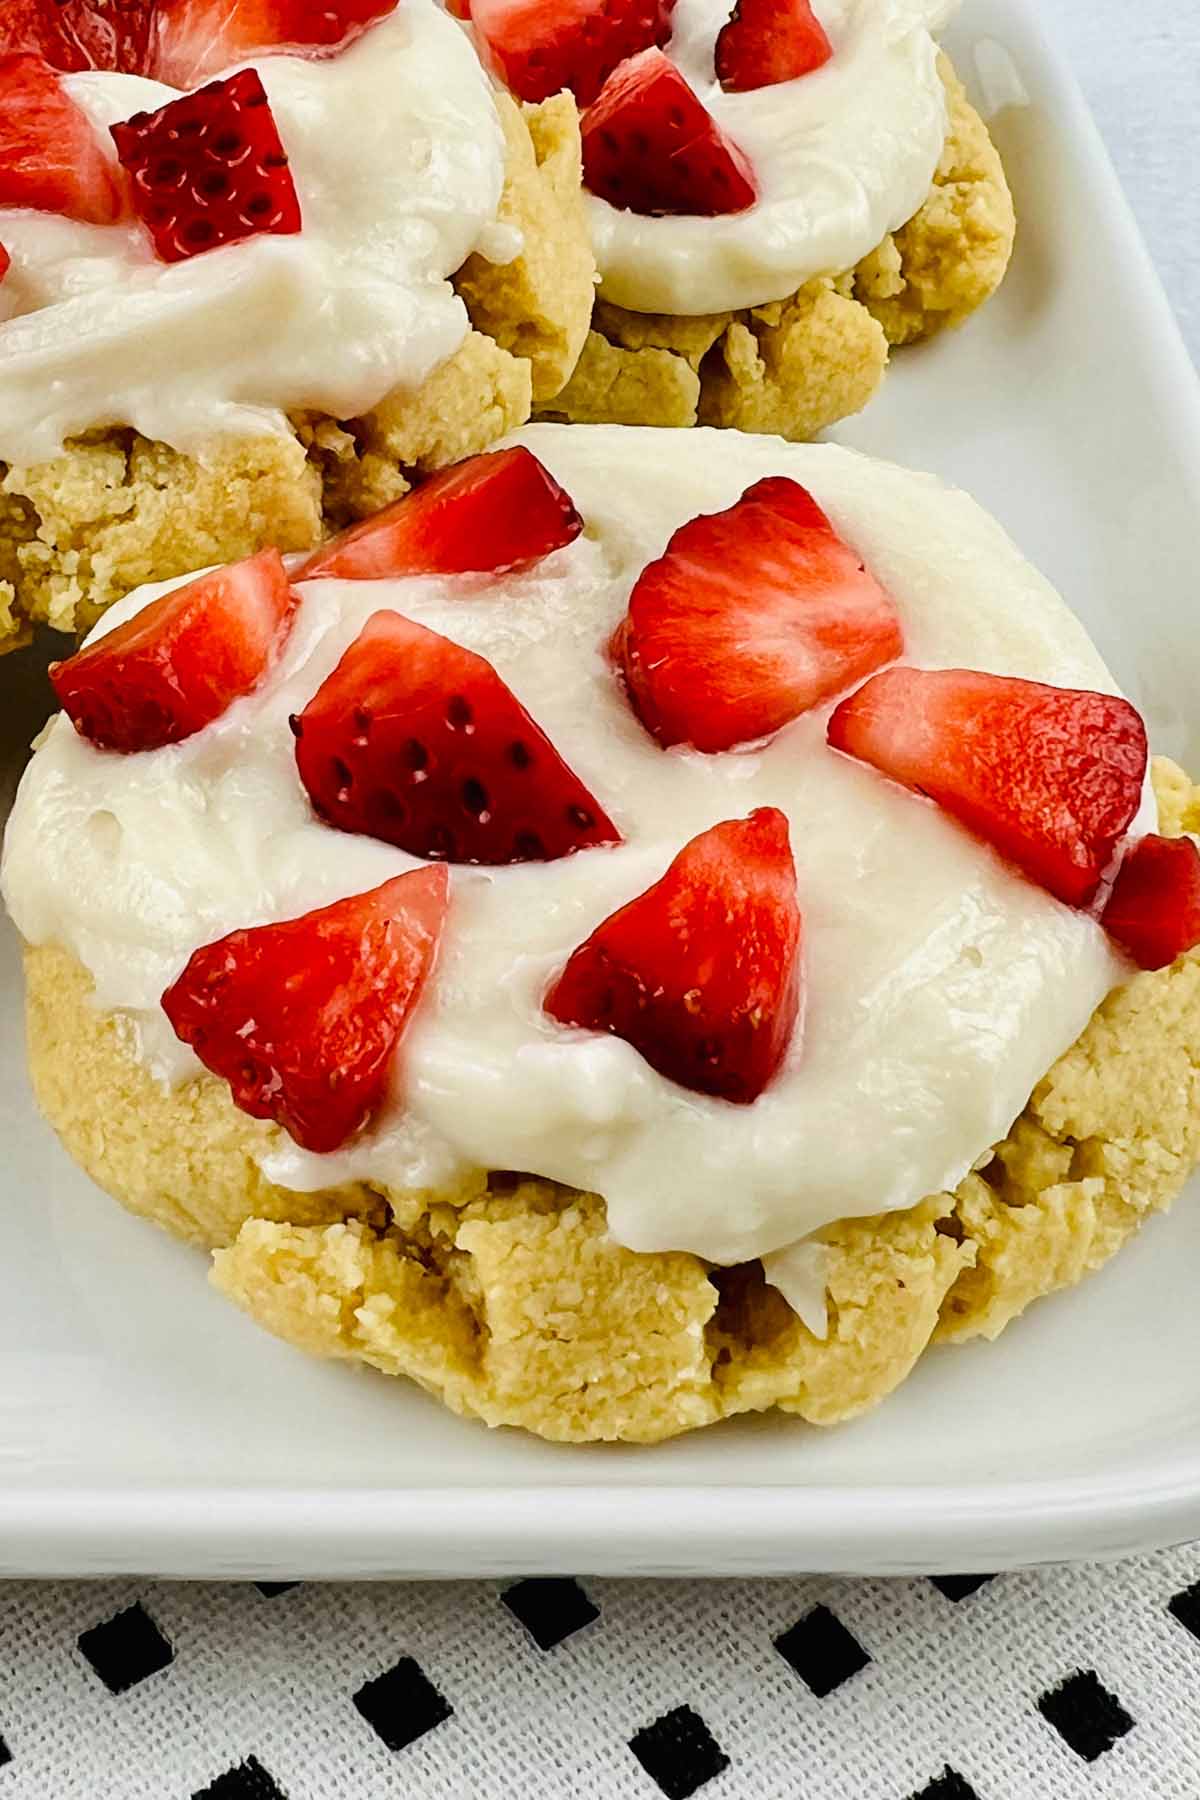 Sugar cookie topped with strawberries.